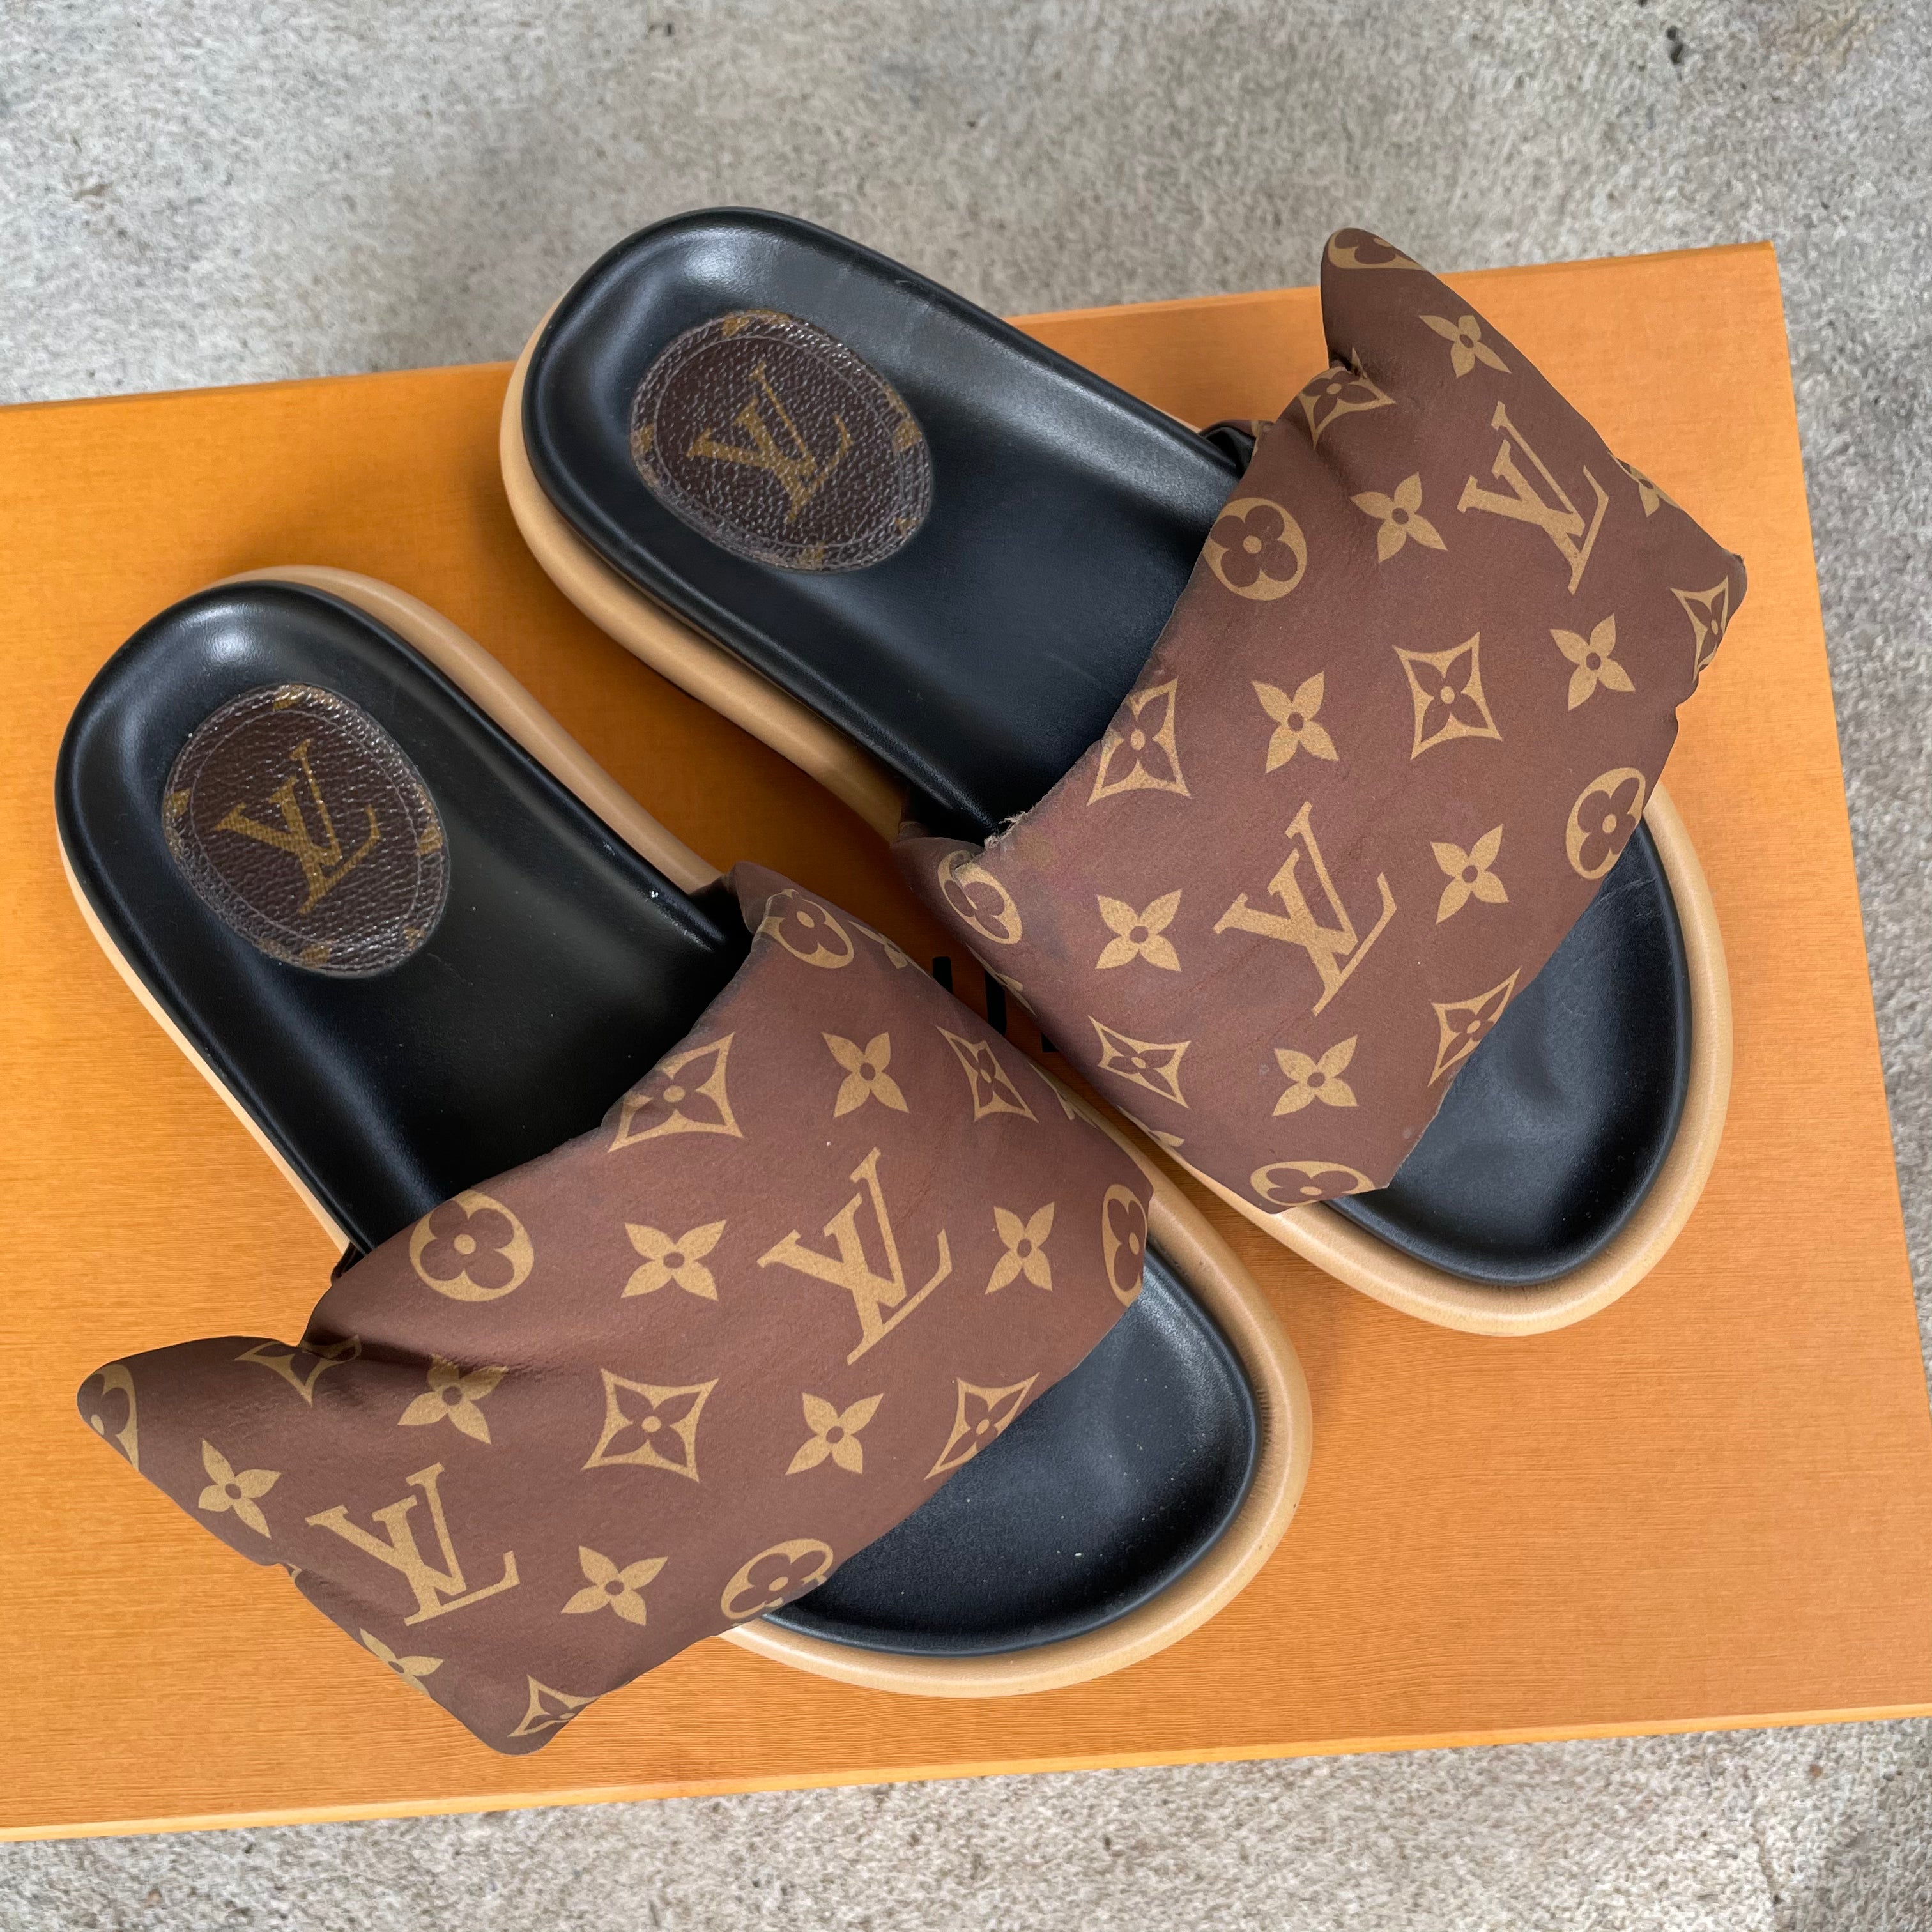 Louis Vuitton Pool Pillow Slides Size 38 – Curated by Charbel